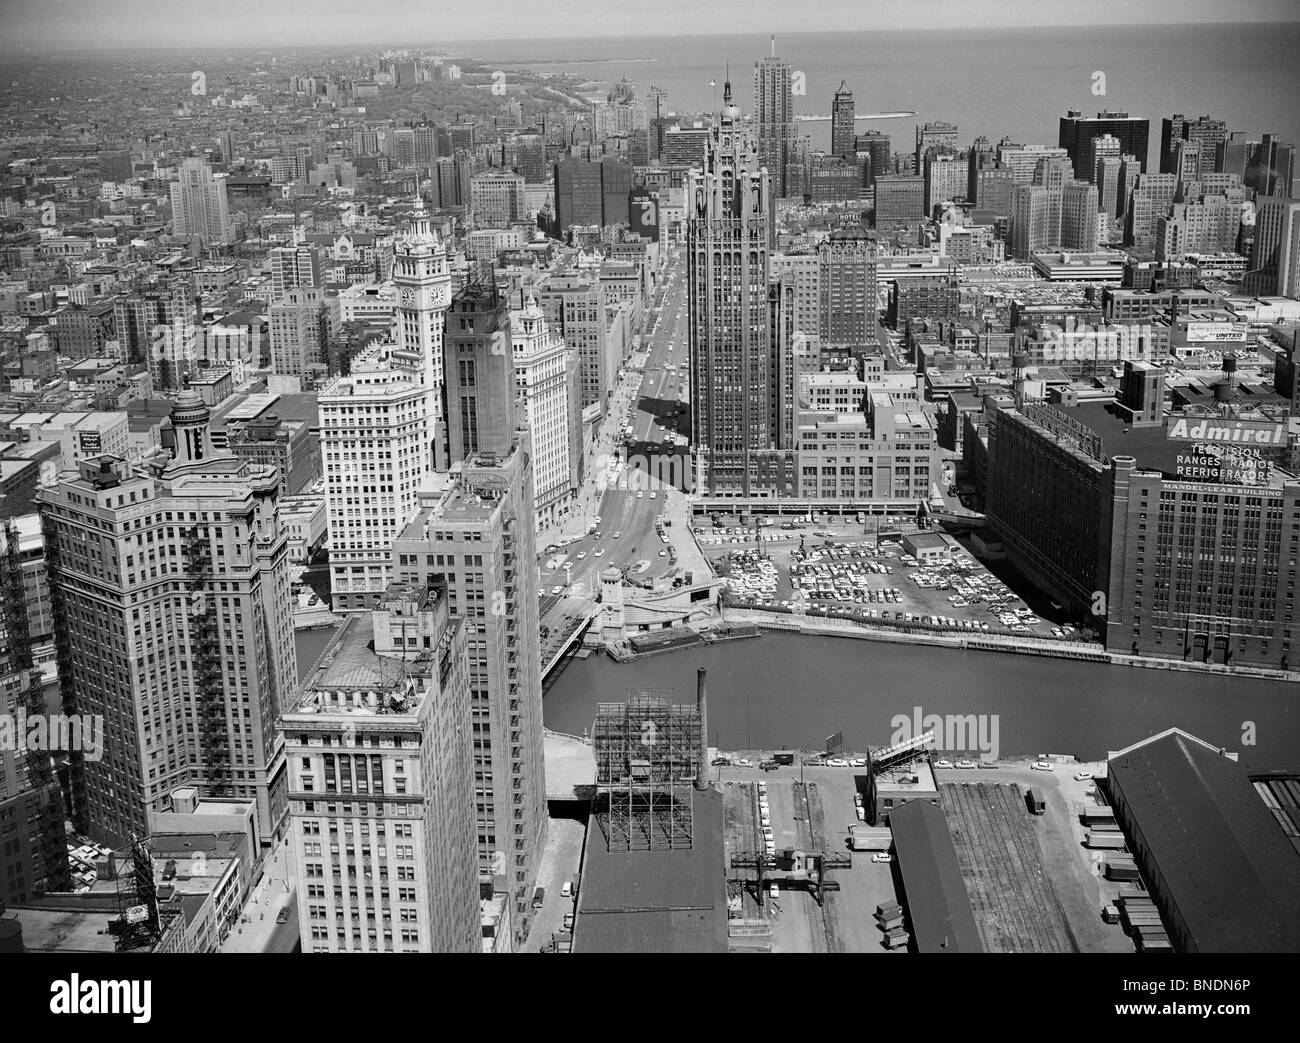 Aerial view of skyscrapers in a city, Chicago River, Chicago, Illinois, USA Stock Photo